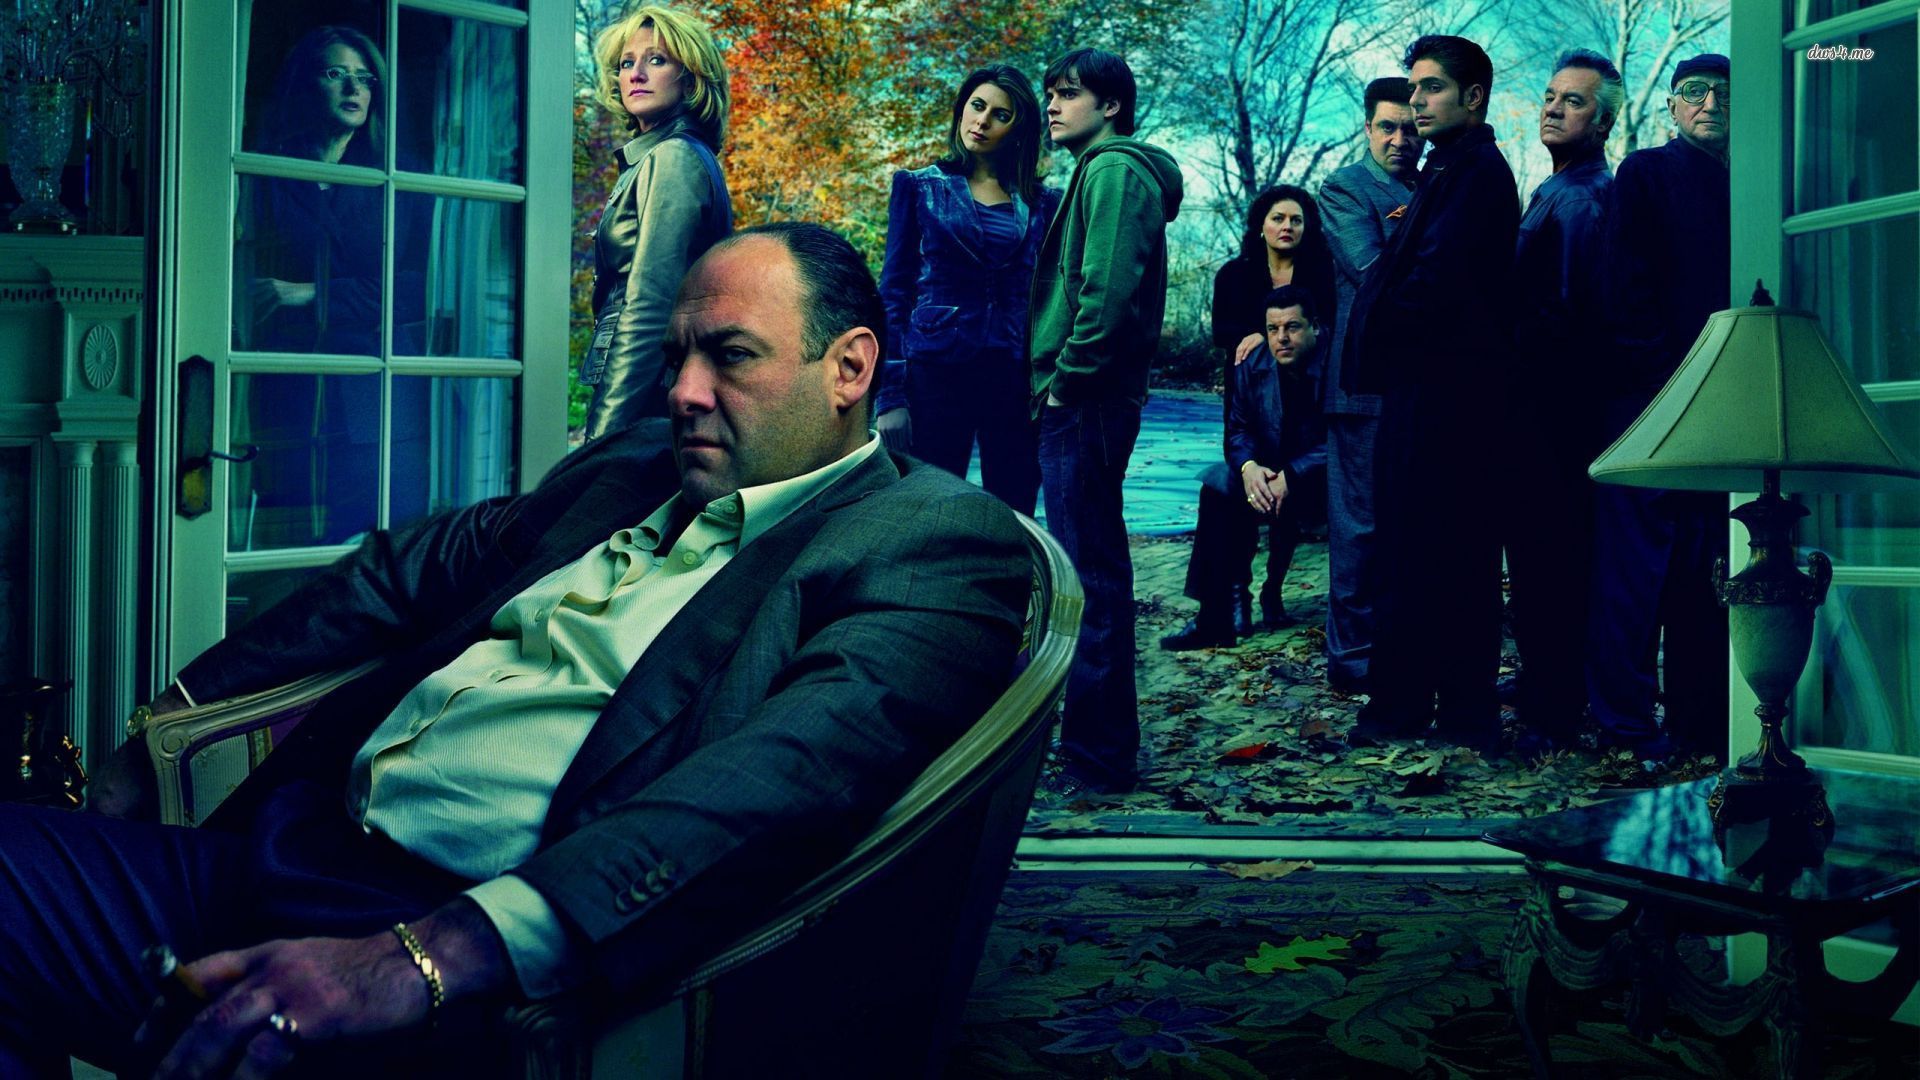 The Sopranos Wallpapers 29 images inside